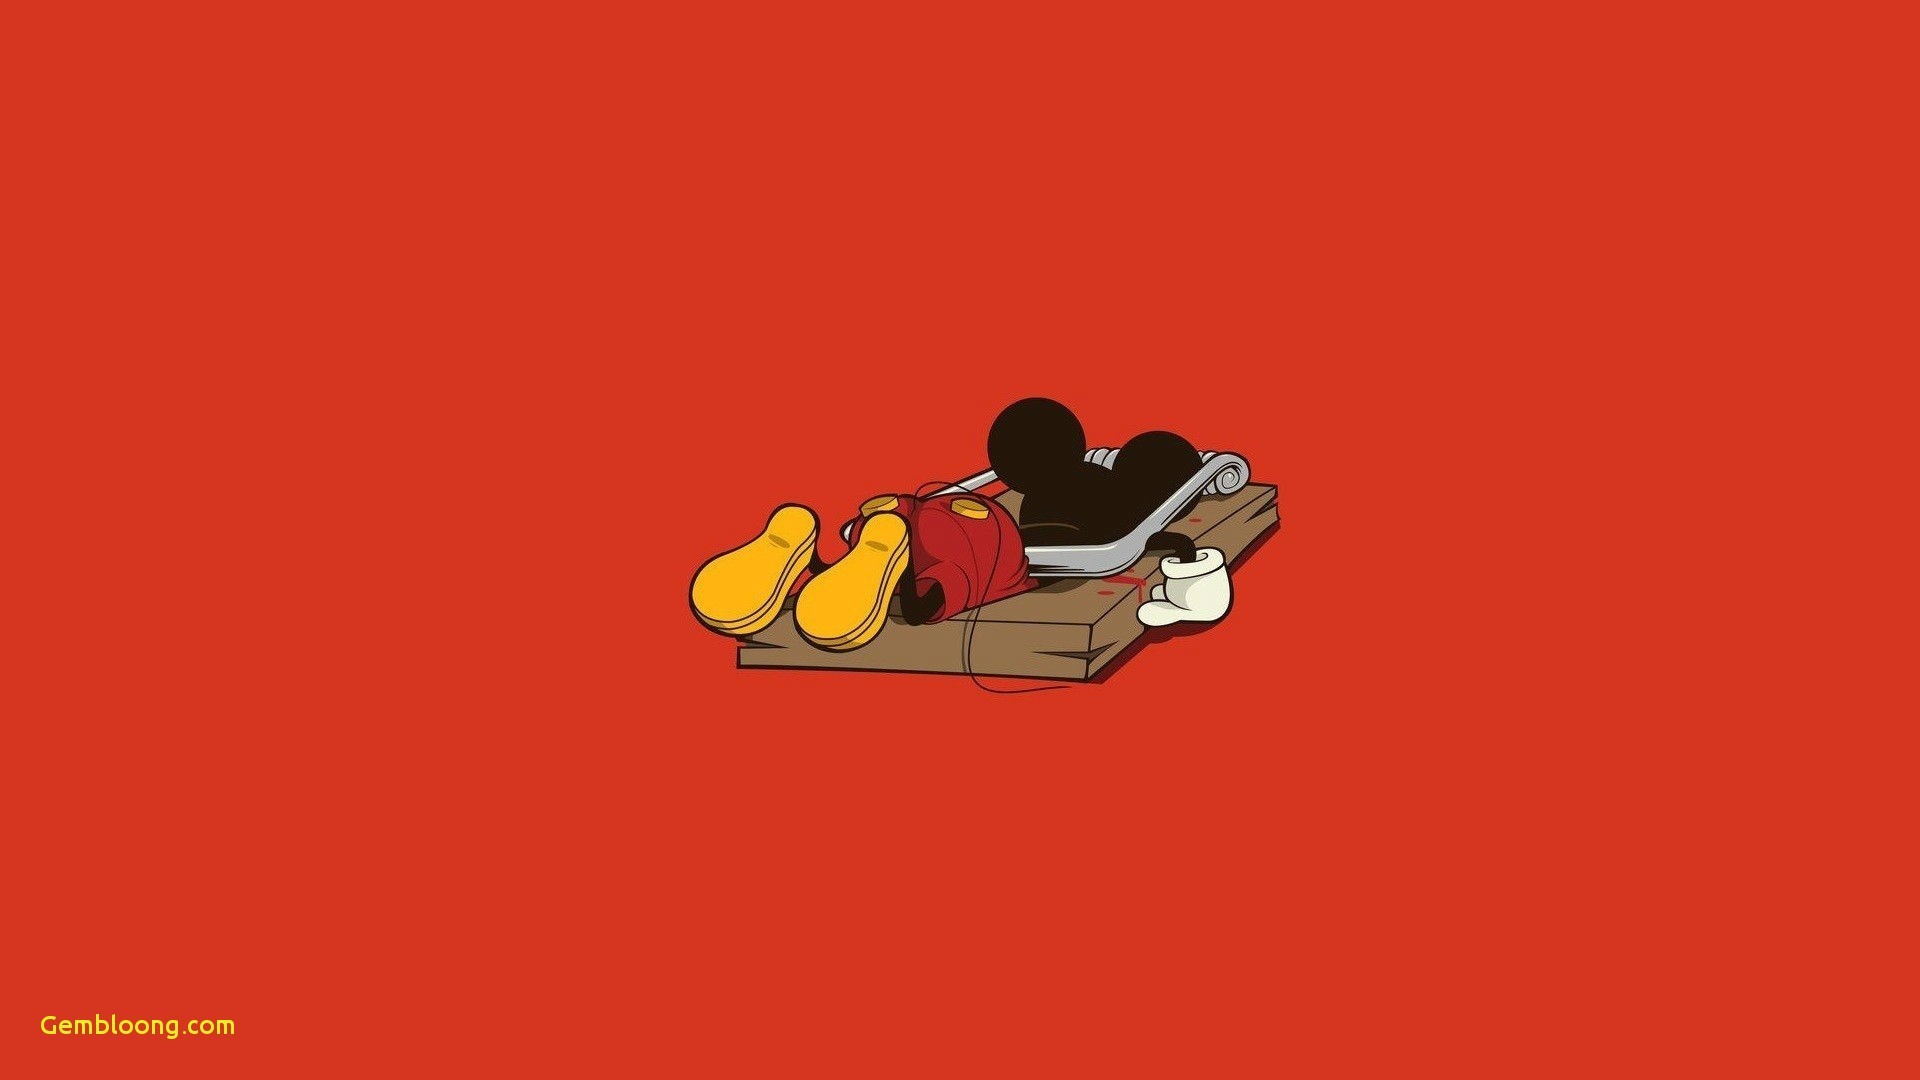 1920x1080 mickey mouse wallpaper iphone #20029